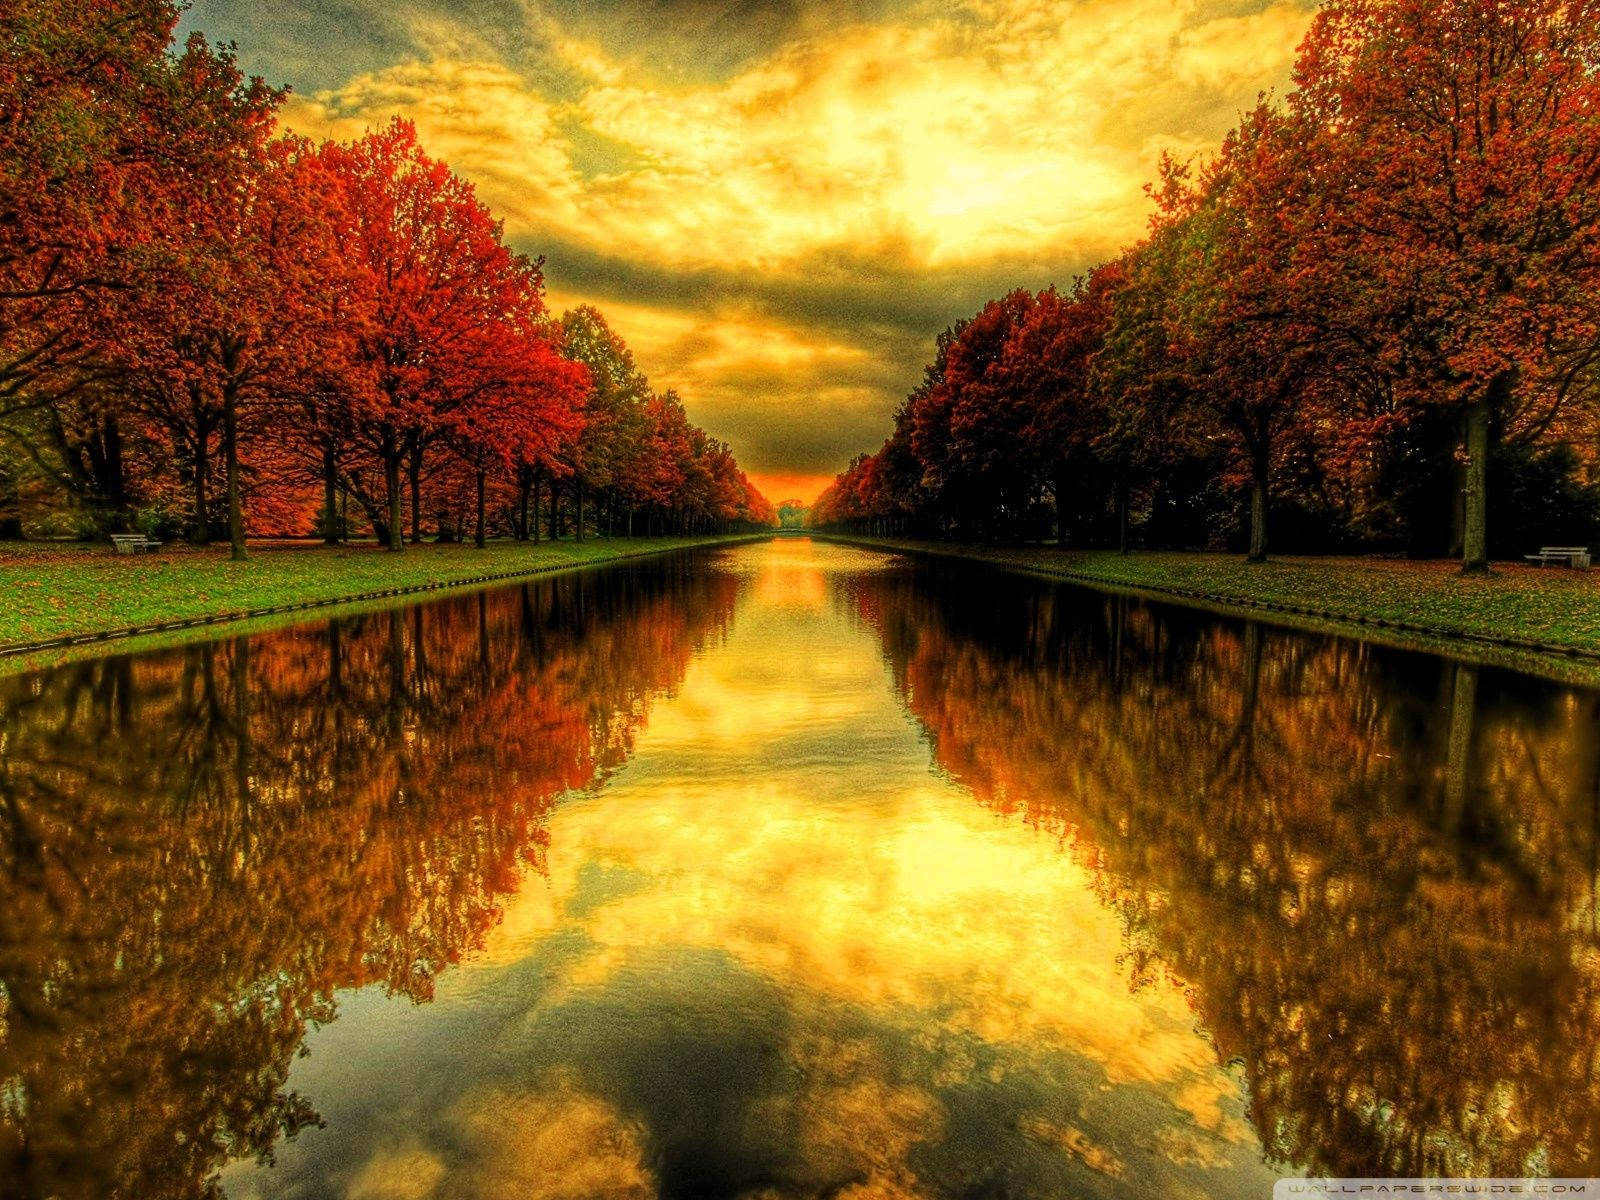 The river turns red amidst the Autumn season Wallpaper